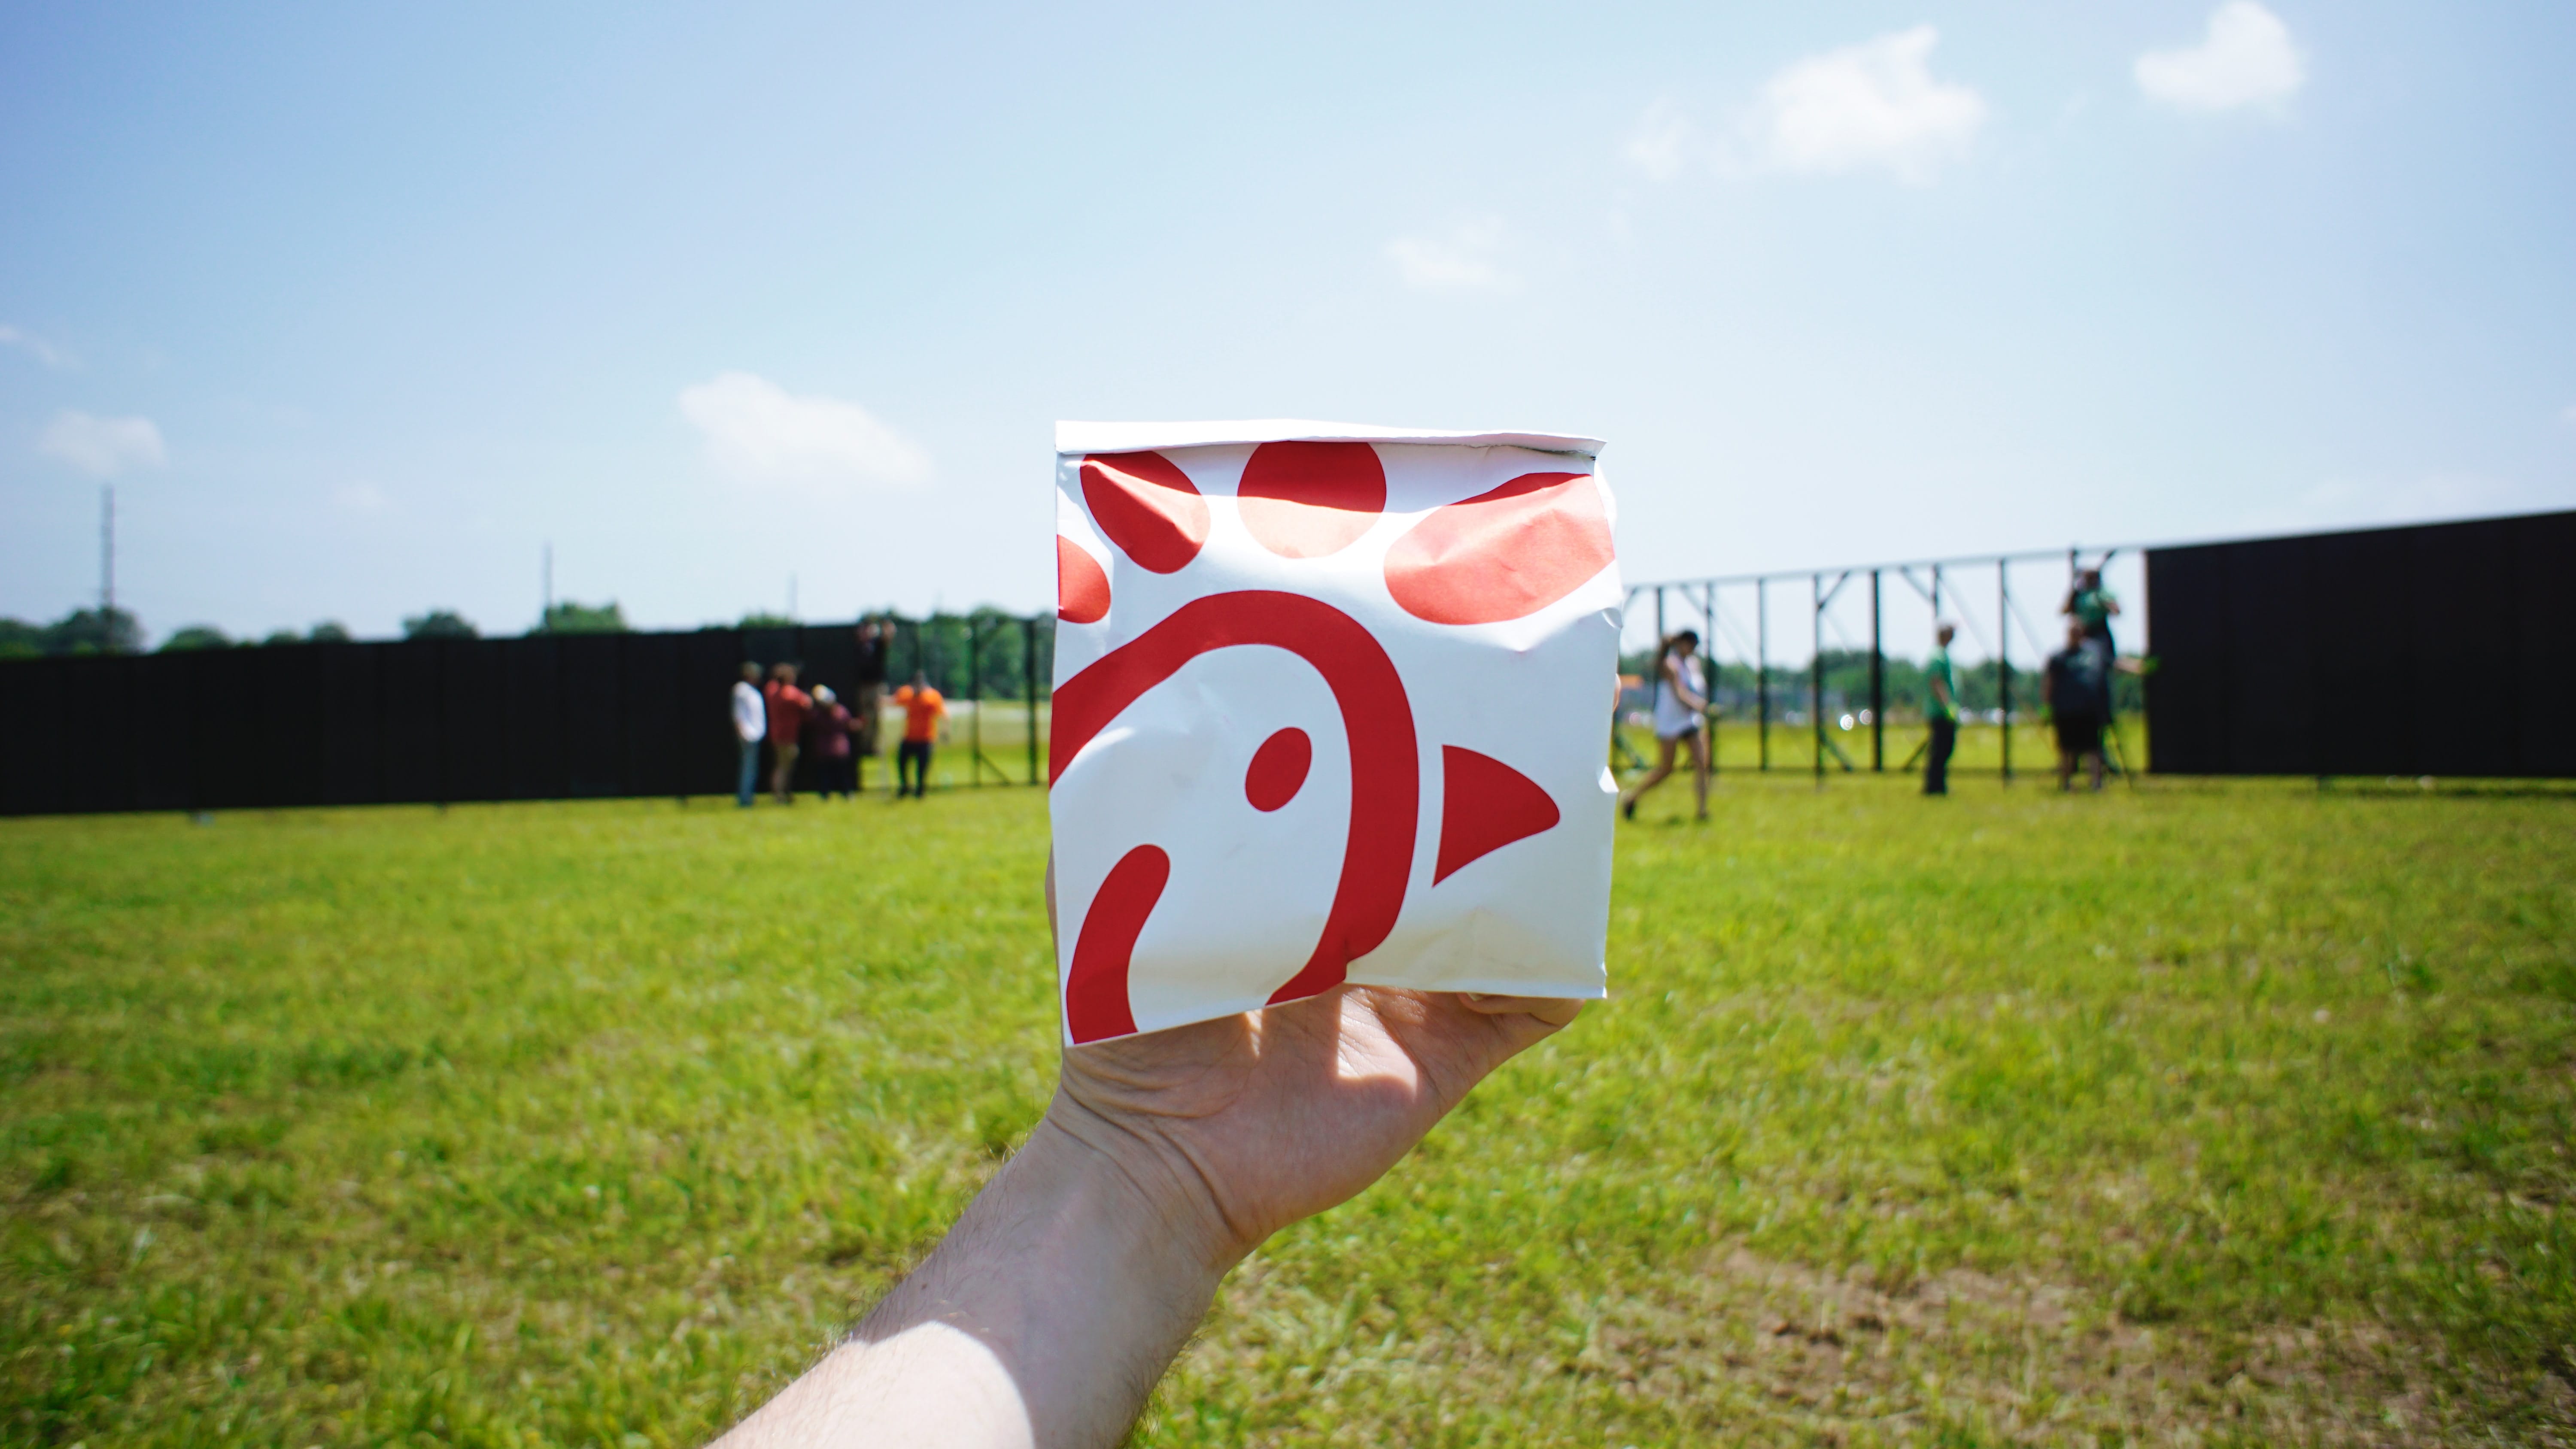 chick fil a to go bag in green field